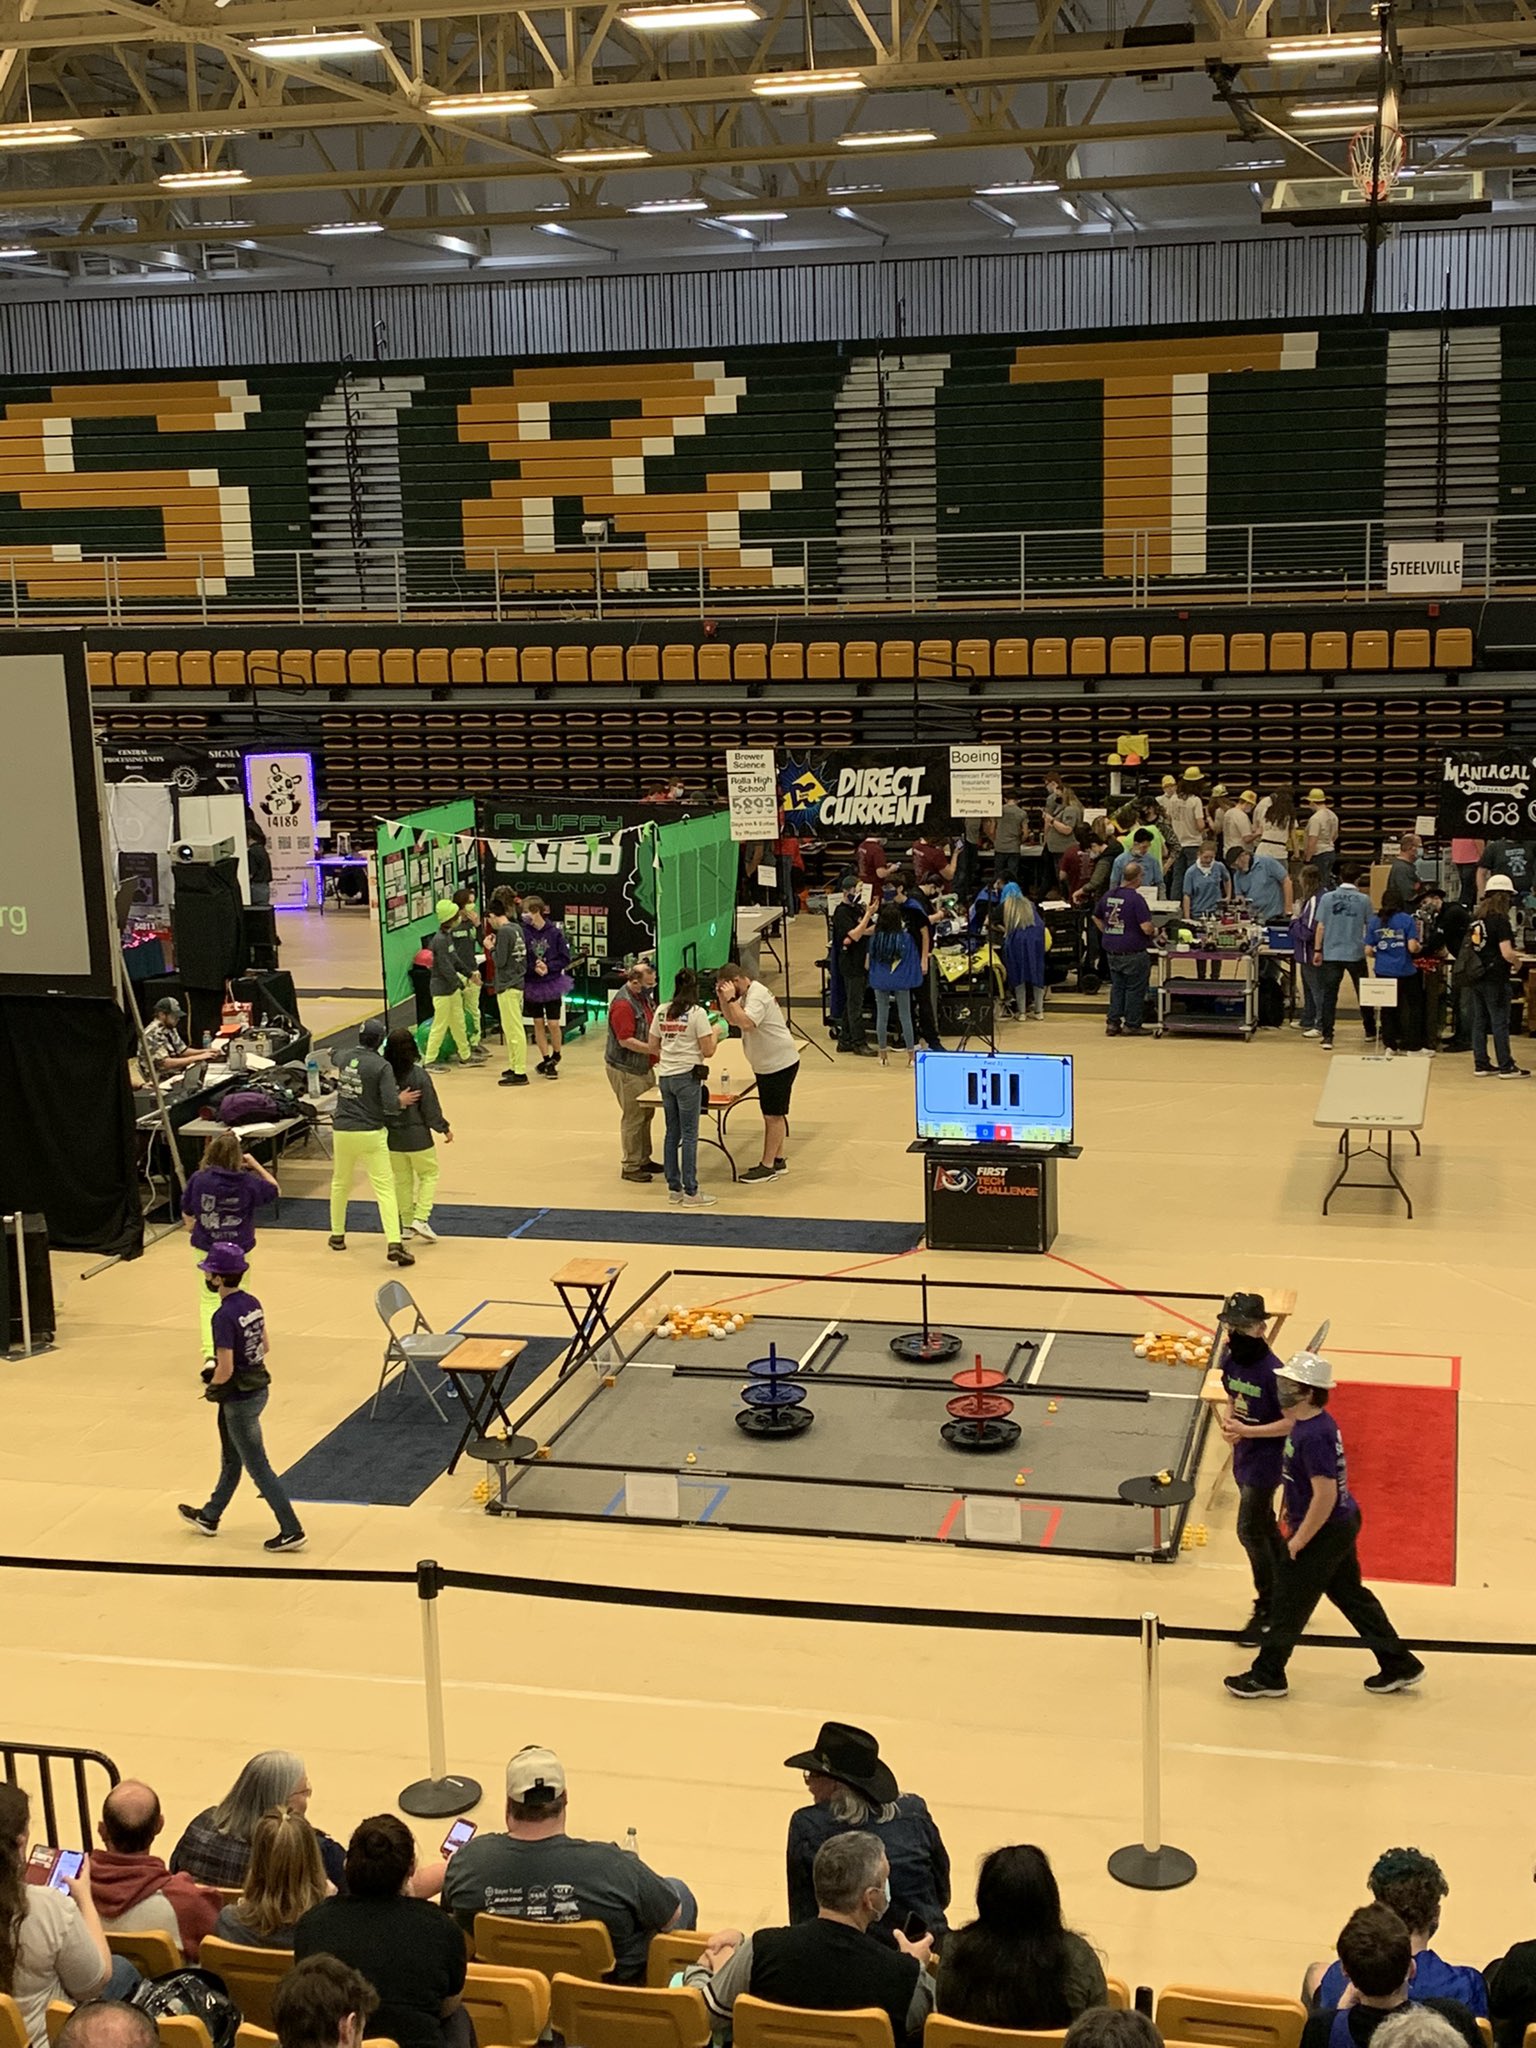 Missouri S&T – News and Events – FIRST Tech Challenge returns to S&T March 4